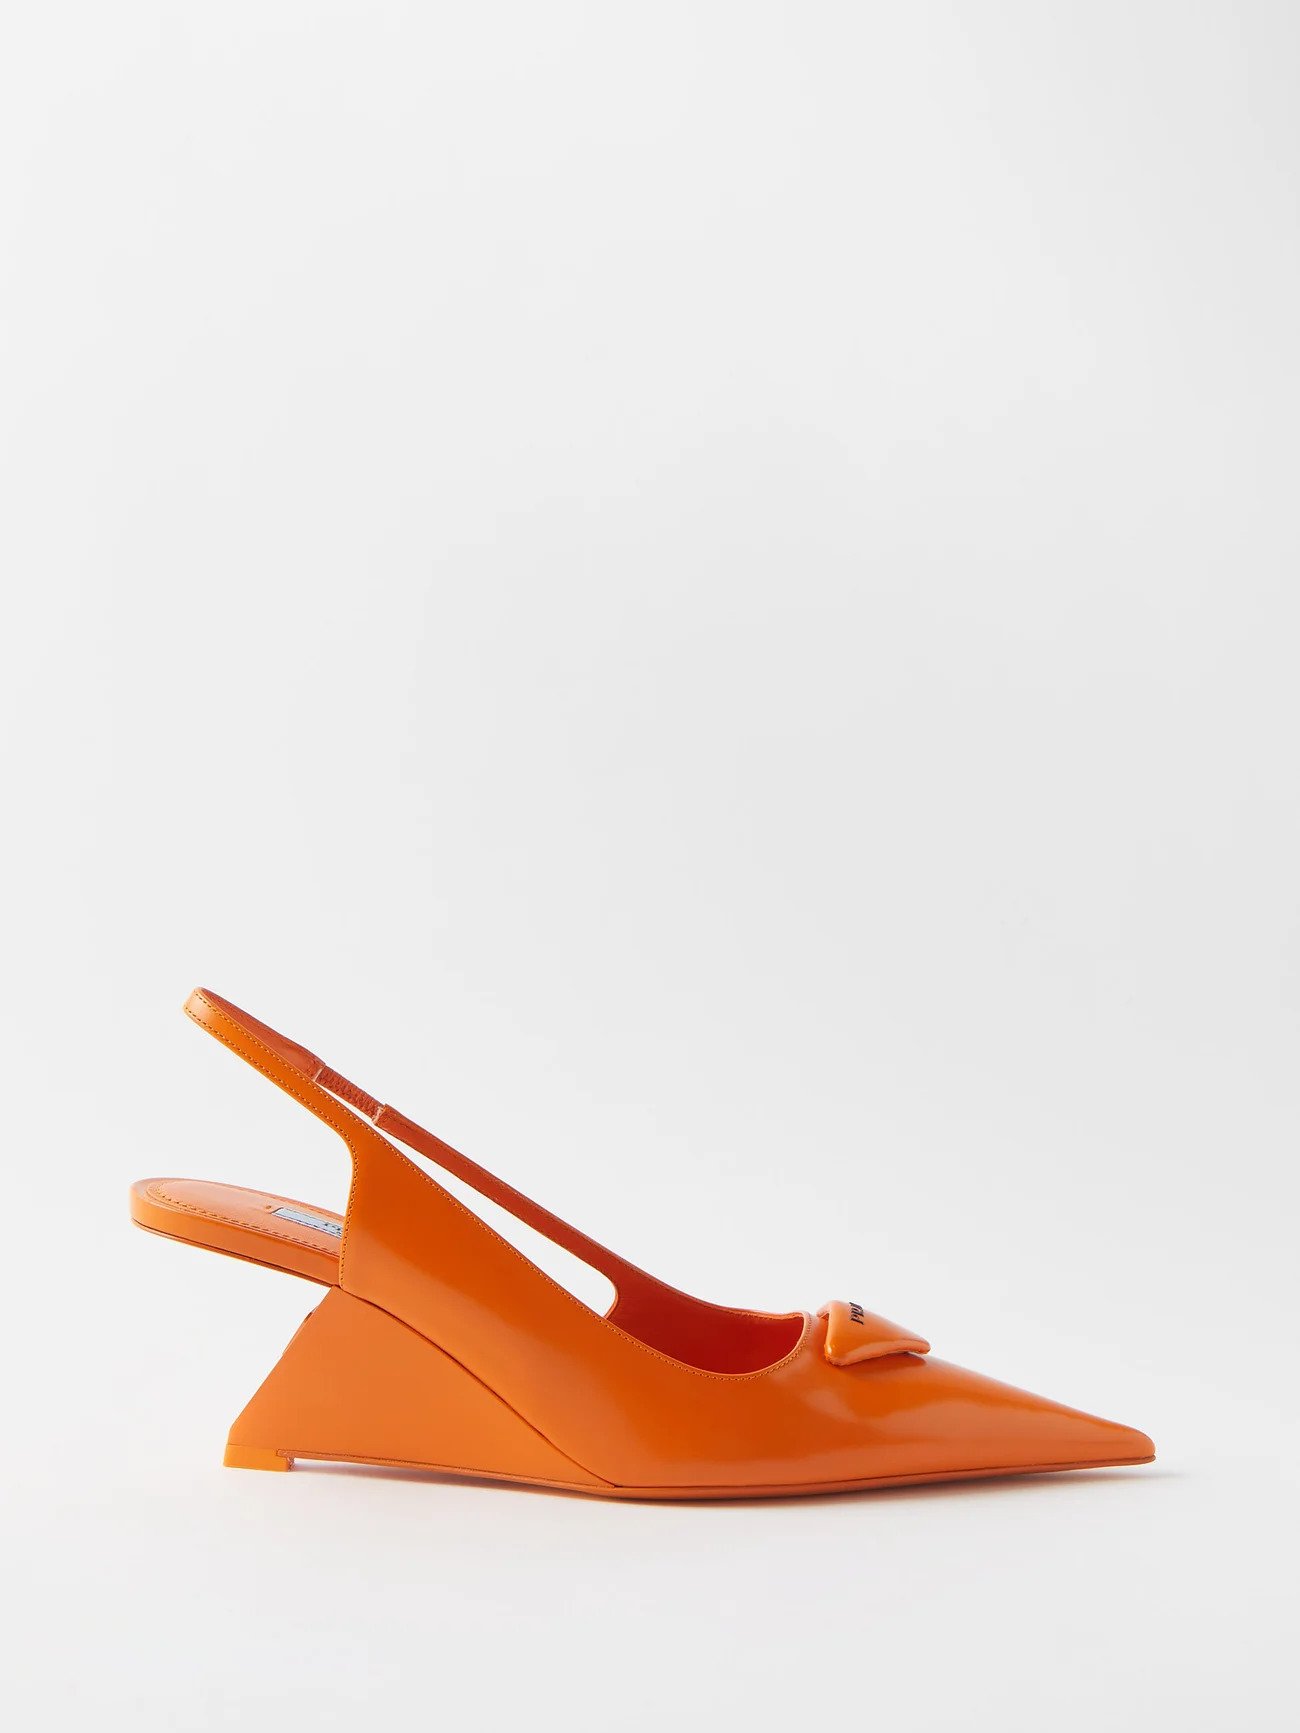 Prada Slingbacks Are Trending—Here's Who Is Wearing Them | Who What Wear UK